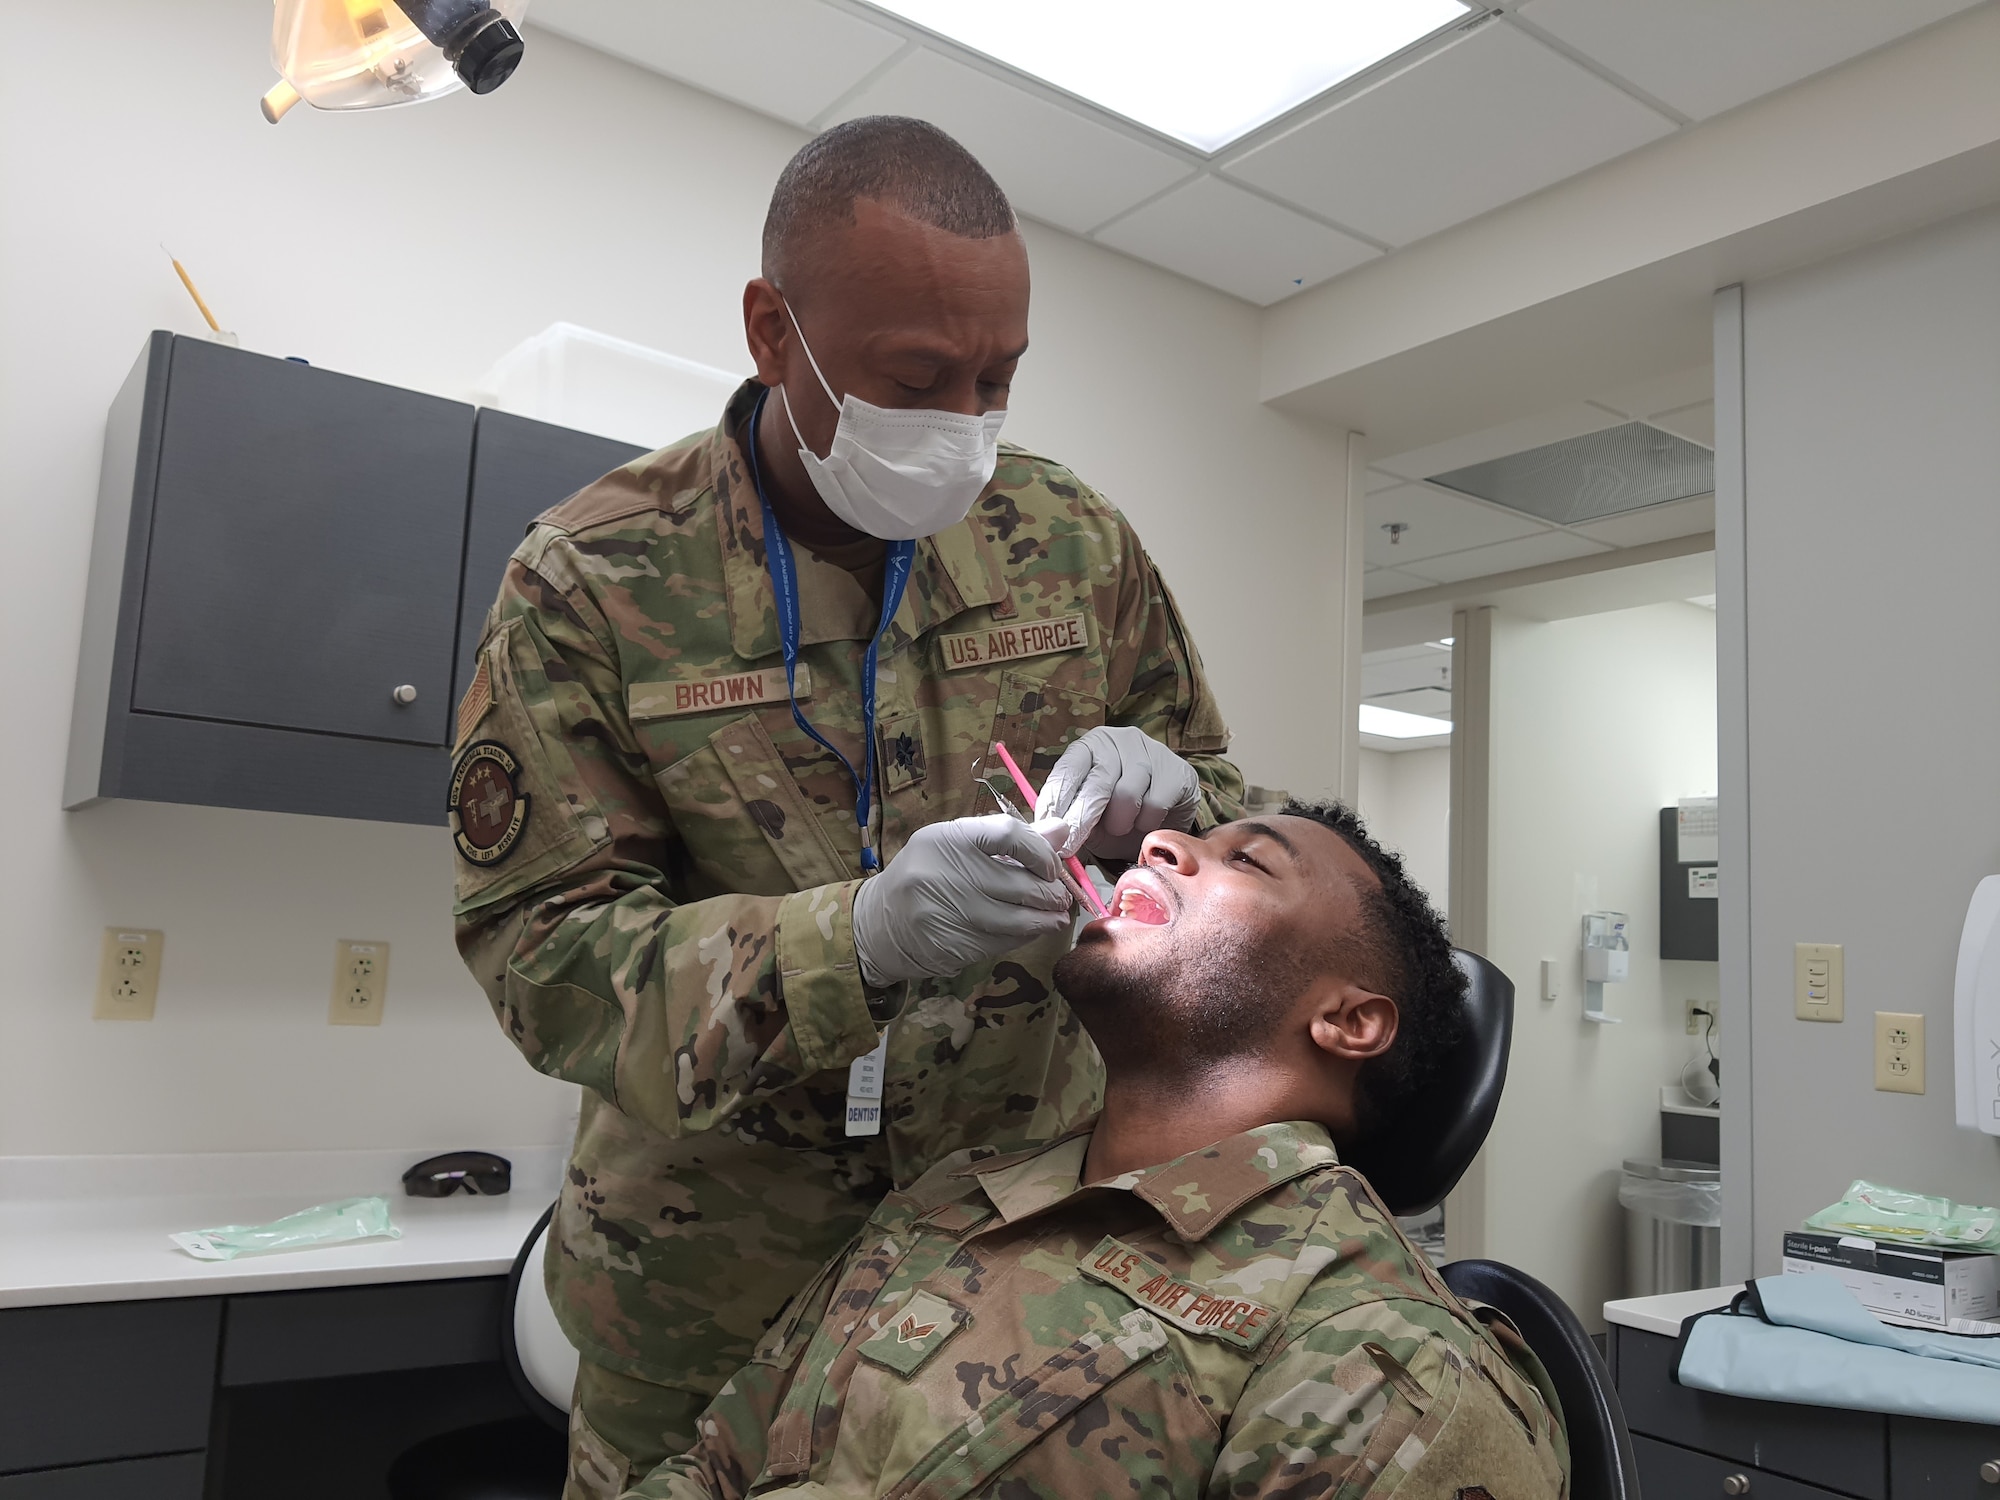 Senior Airman D'Orsay Scott, 41st Aerial Port Squadron air transportation specialist, receives his dental exam from Lt. Col. Jeffrey Brown, 403rd Aeromedical Staging Squadron dentist, Feb. 6, 2021. The 403rd ASTS is responsible for ensuring that the Reserve Citizen Airmen of the 403rd Wing are current or 'green' on their Individual Medical Readiness status; which includes providing immunizations, optometry services, dental x-rays and exams, lab draws, audiograms, and physicals. (U.S. Air Force photo by Master Sgt. Jessica Kendziorek/ photo permission granted by Senior Airman D'Orsay Scott)